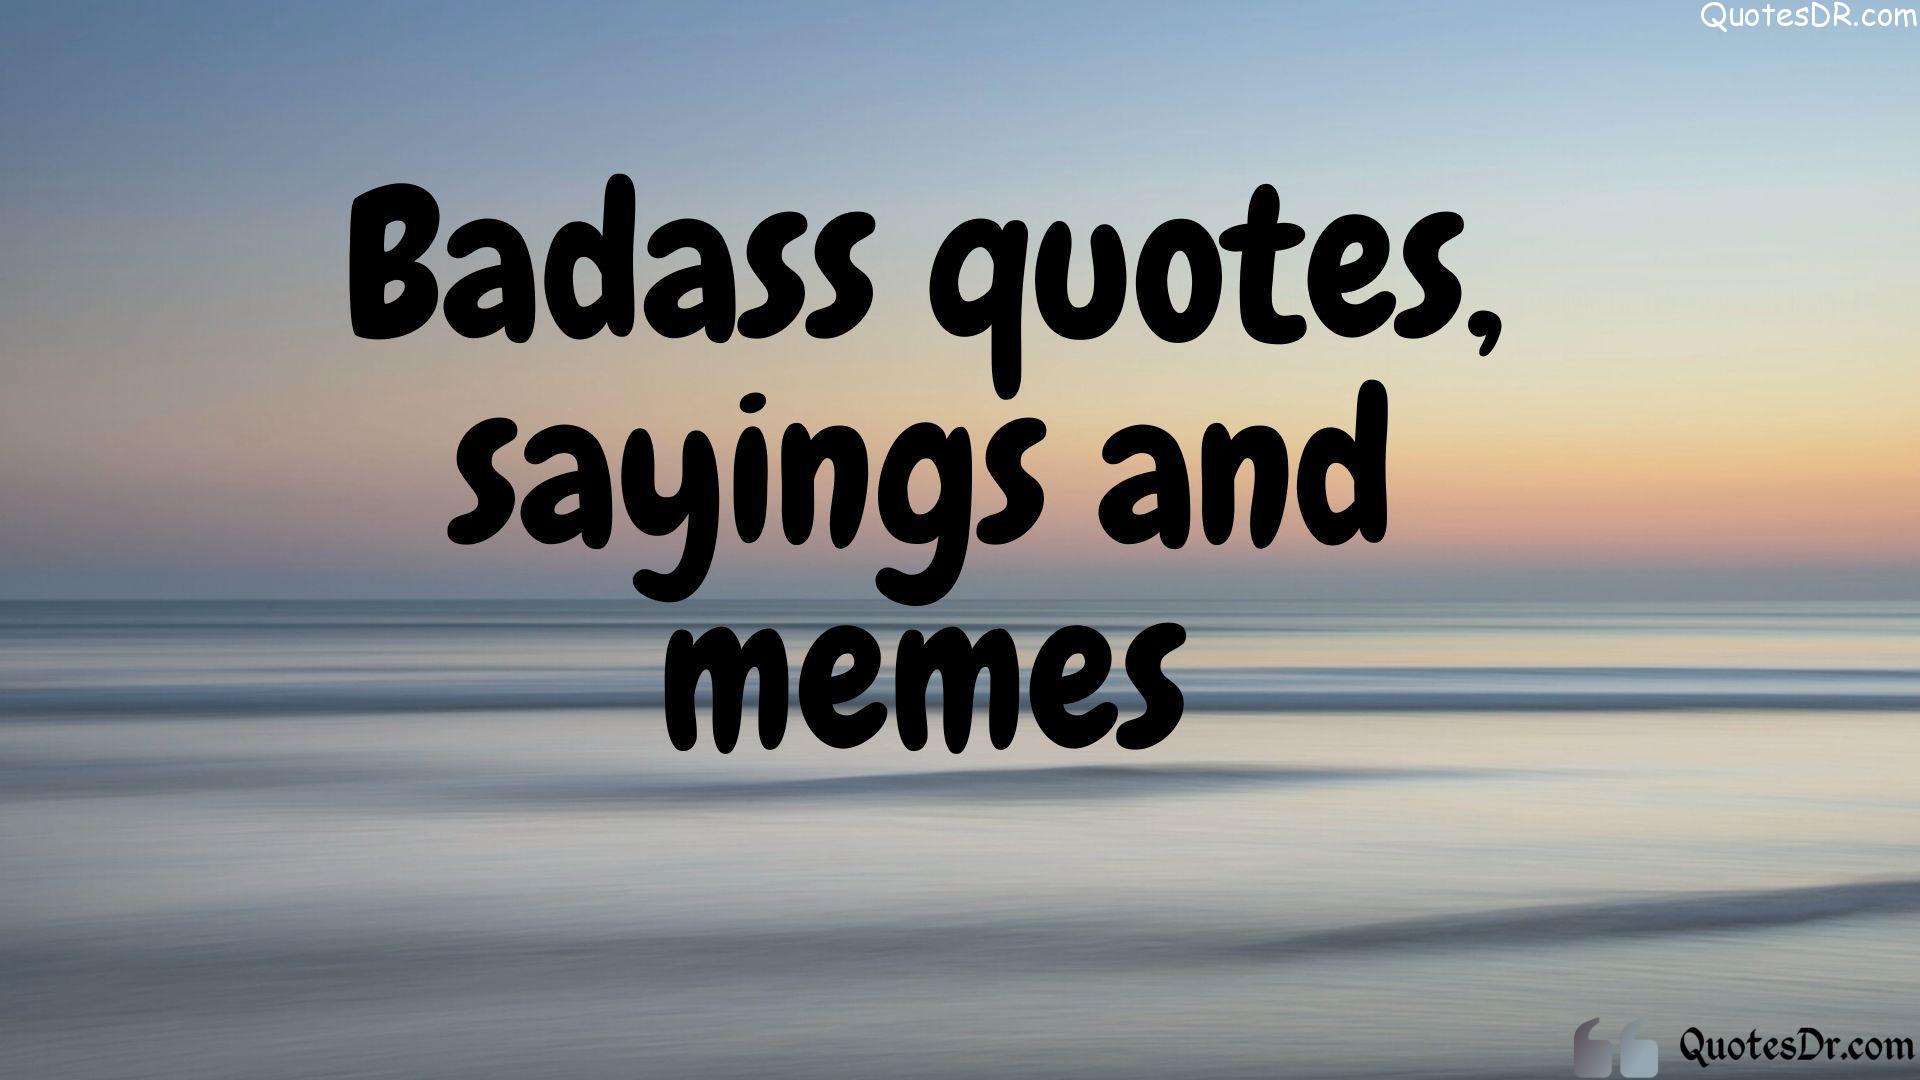 340+ Badass Quotes To Make You Fearless